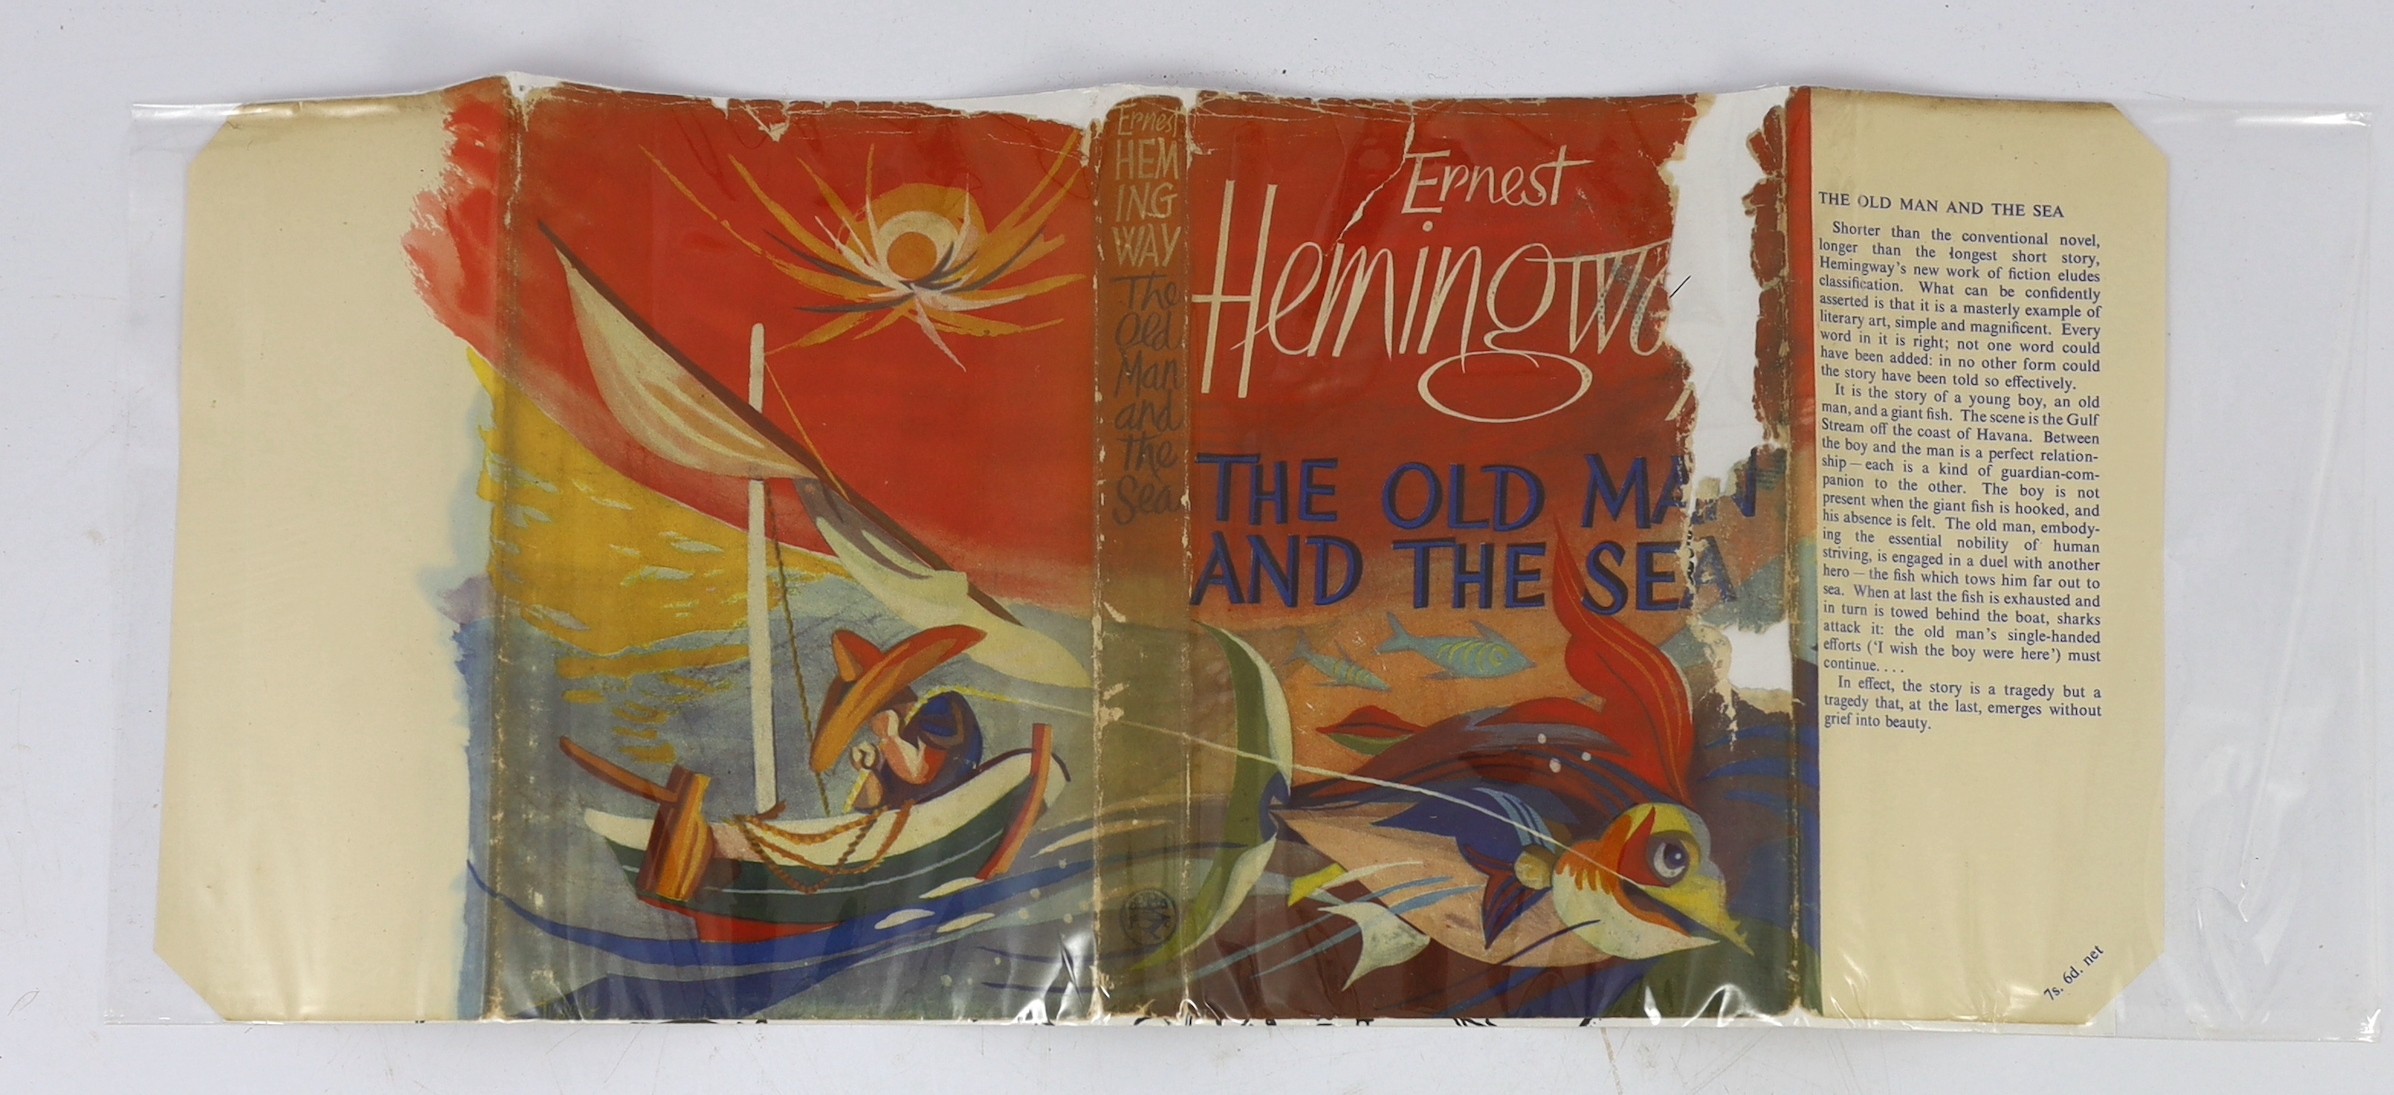 Hemingway, Ernest - The Old Man and the Sea, 1st UK edition, 8vo, the unclipped d/j with loss to right front panel and spine head, ownership inscription to front fly leaf, Jonathan Cape, London, 1952